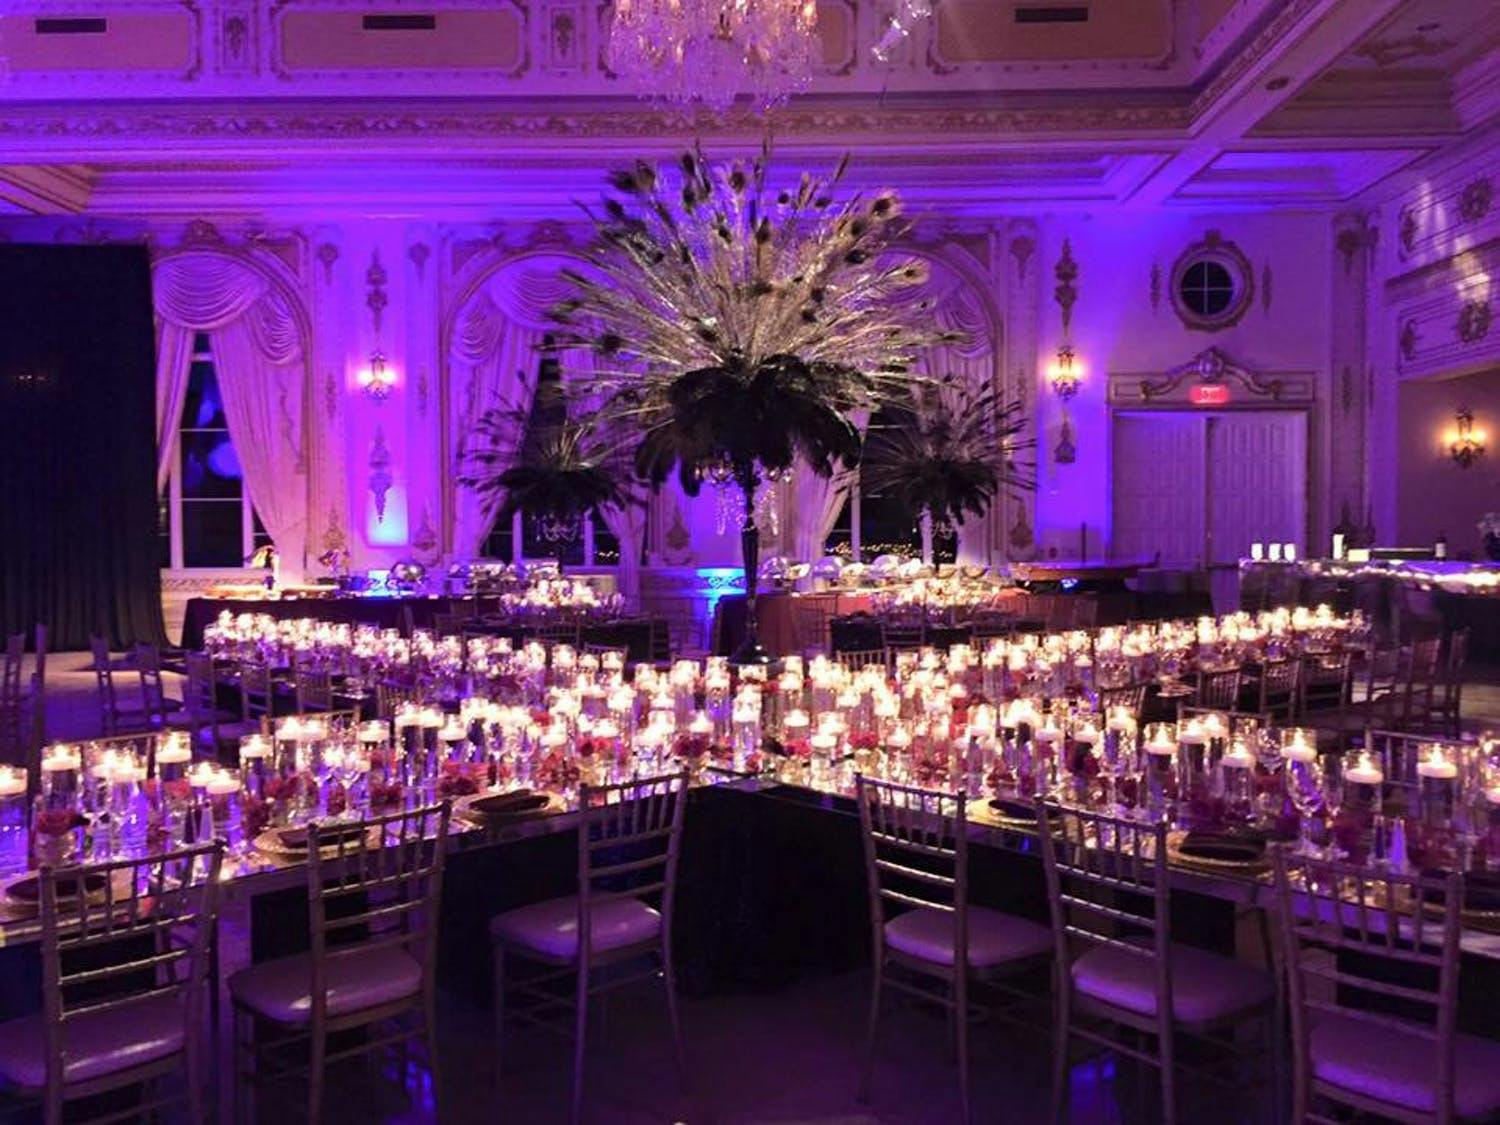 Wedding Ballroom With Mirrored Tables and Glittering Candle Centerpieces | PartySlate